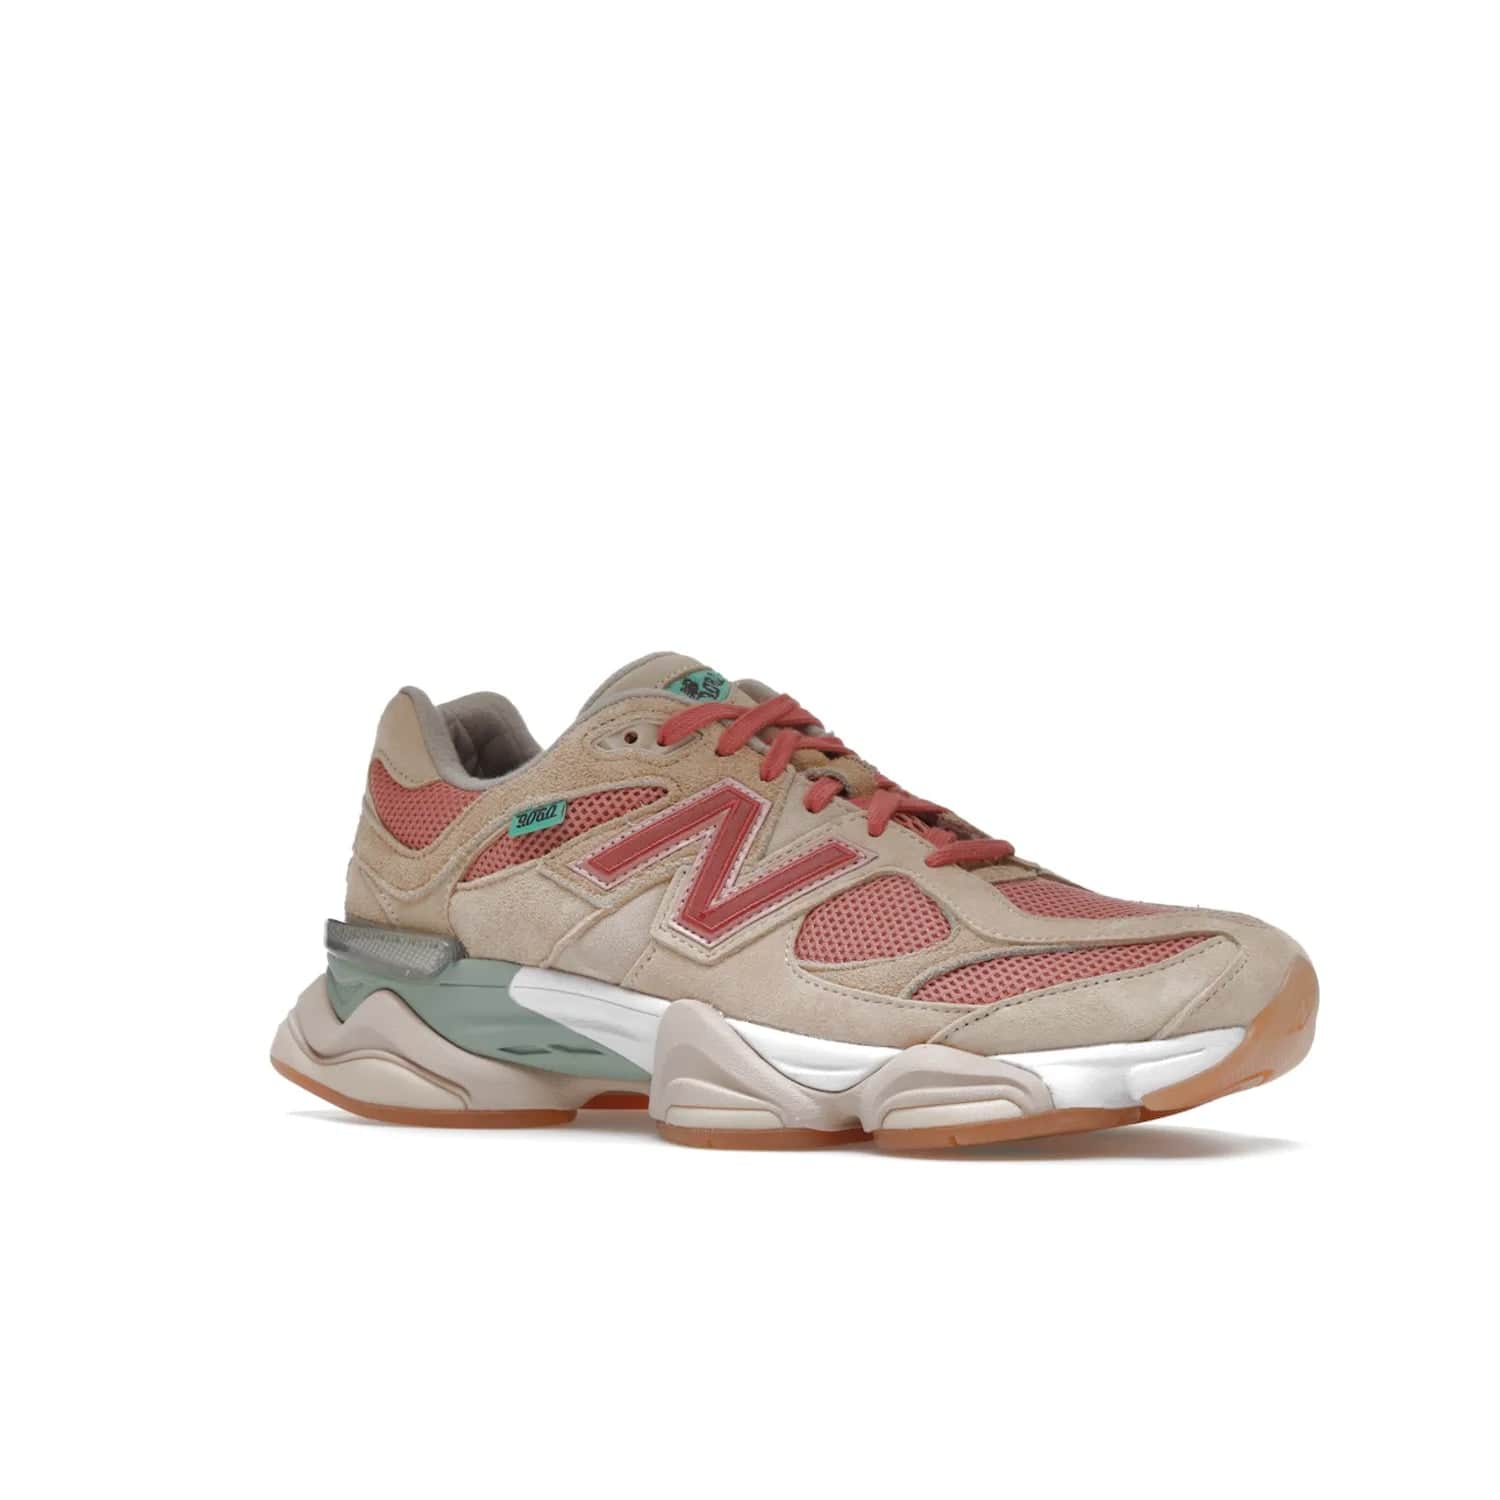 New Balance 9060 Joe Freshgoods Inside Voices Penny Cookie Pink - Image 4 - Only at www.BallersClubKickz.com - Introducing the New Balance 9060 Joe Freshgoods Inside Voices Cookie Pink. A stylish and comfortable sneaker featuring an ivory cream and blossom mesh construction, light brown suede overlays, New Balance logos, and "Inside Voices" embroidery. A white, green and beige sculptural sole finishes the look.